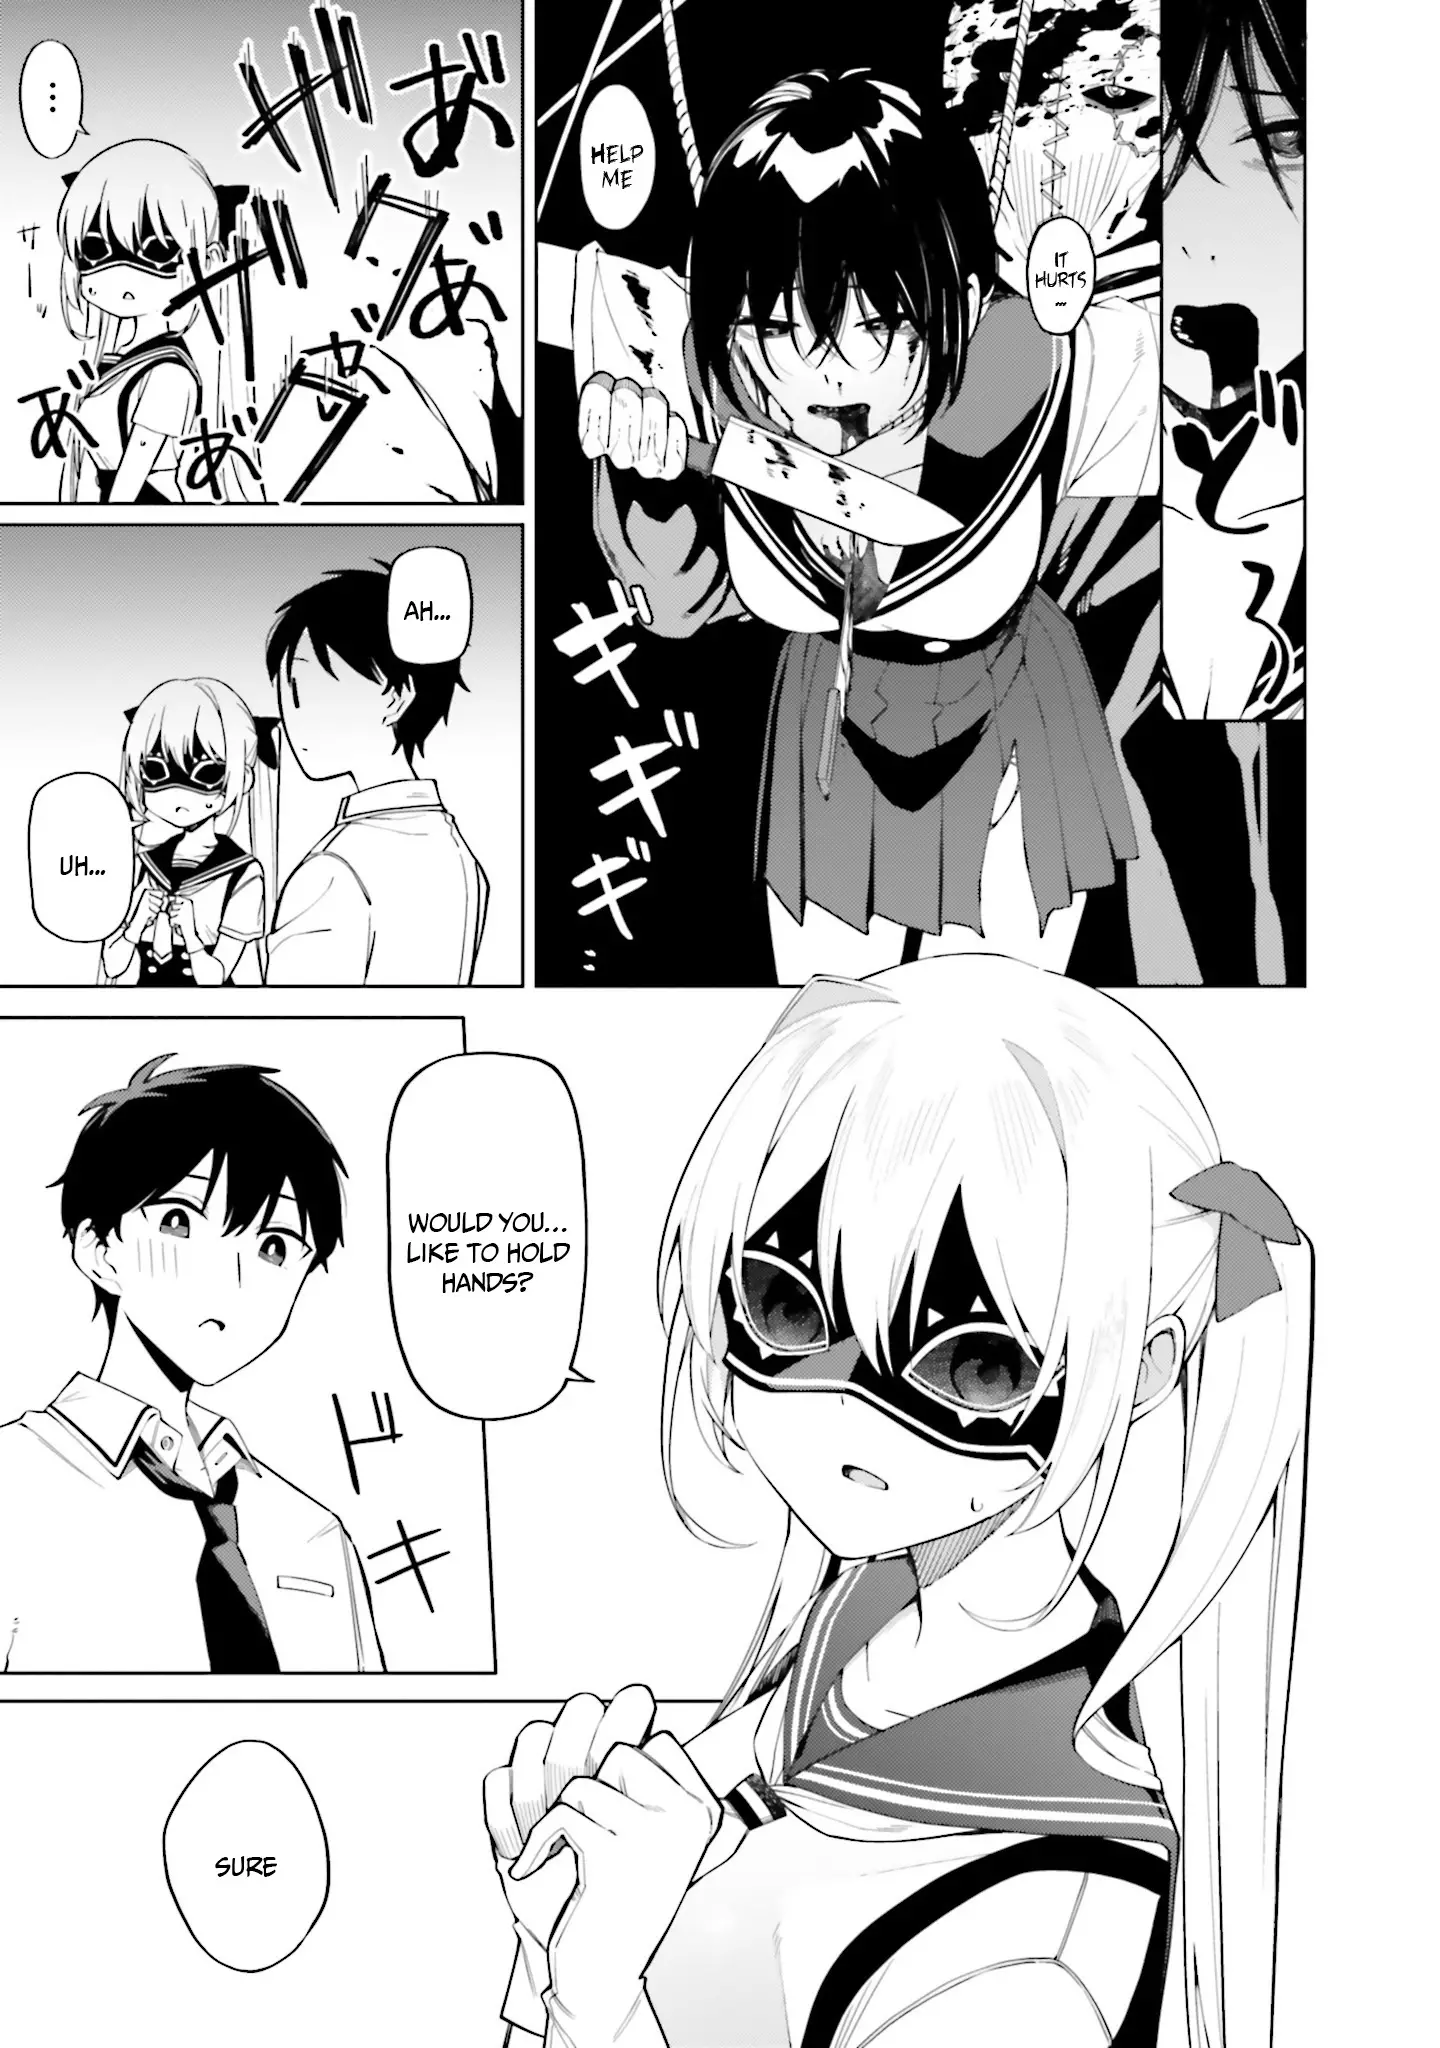 I Don't Understand Shirogane-San's Facial Expression At All - 12 page 8-195a9282